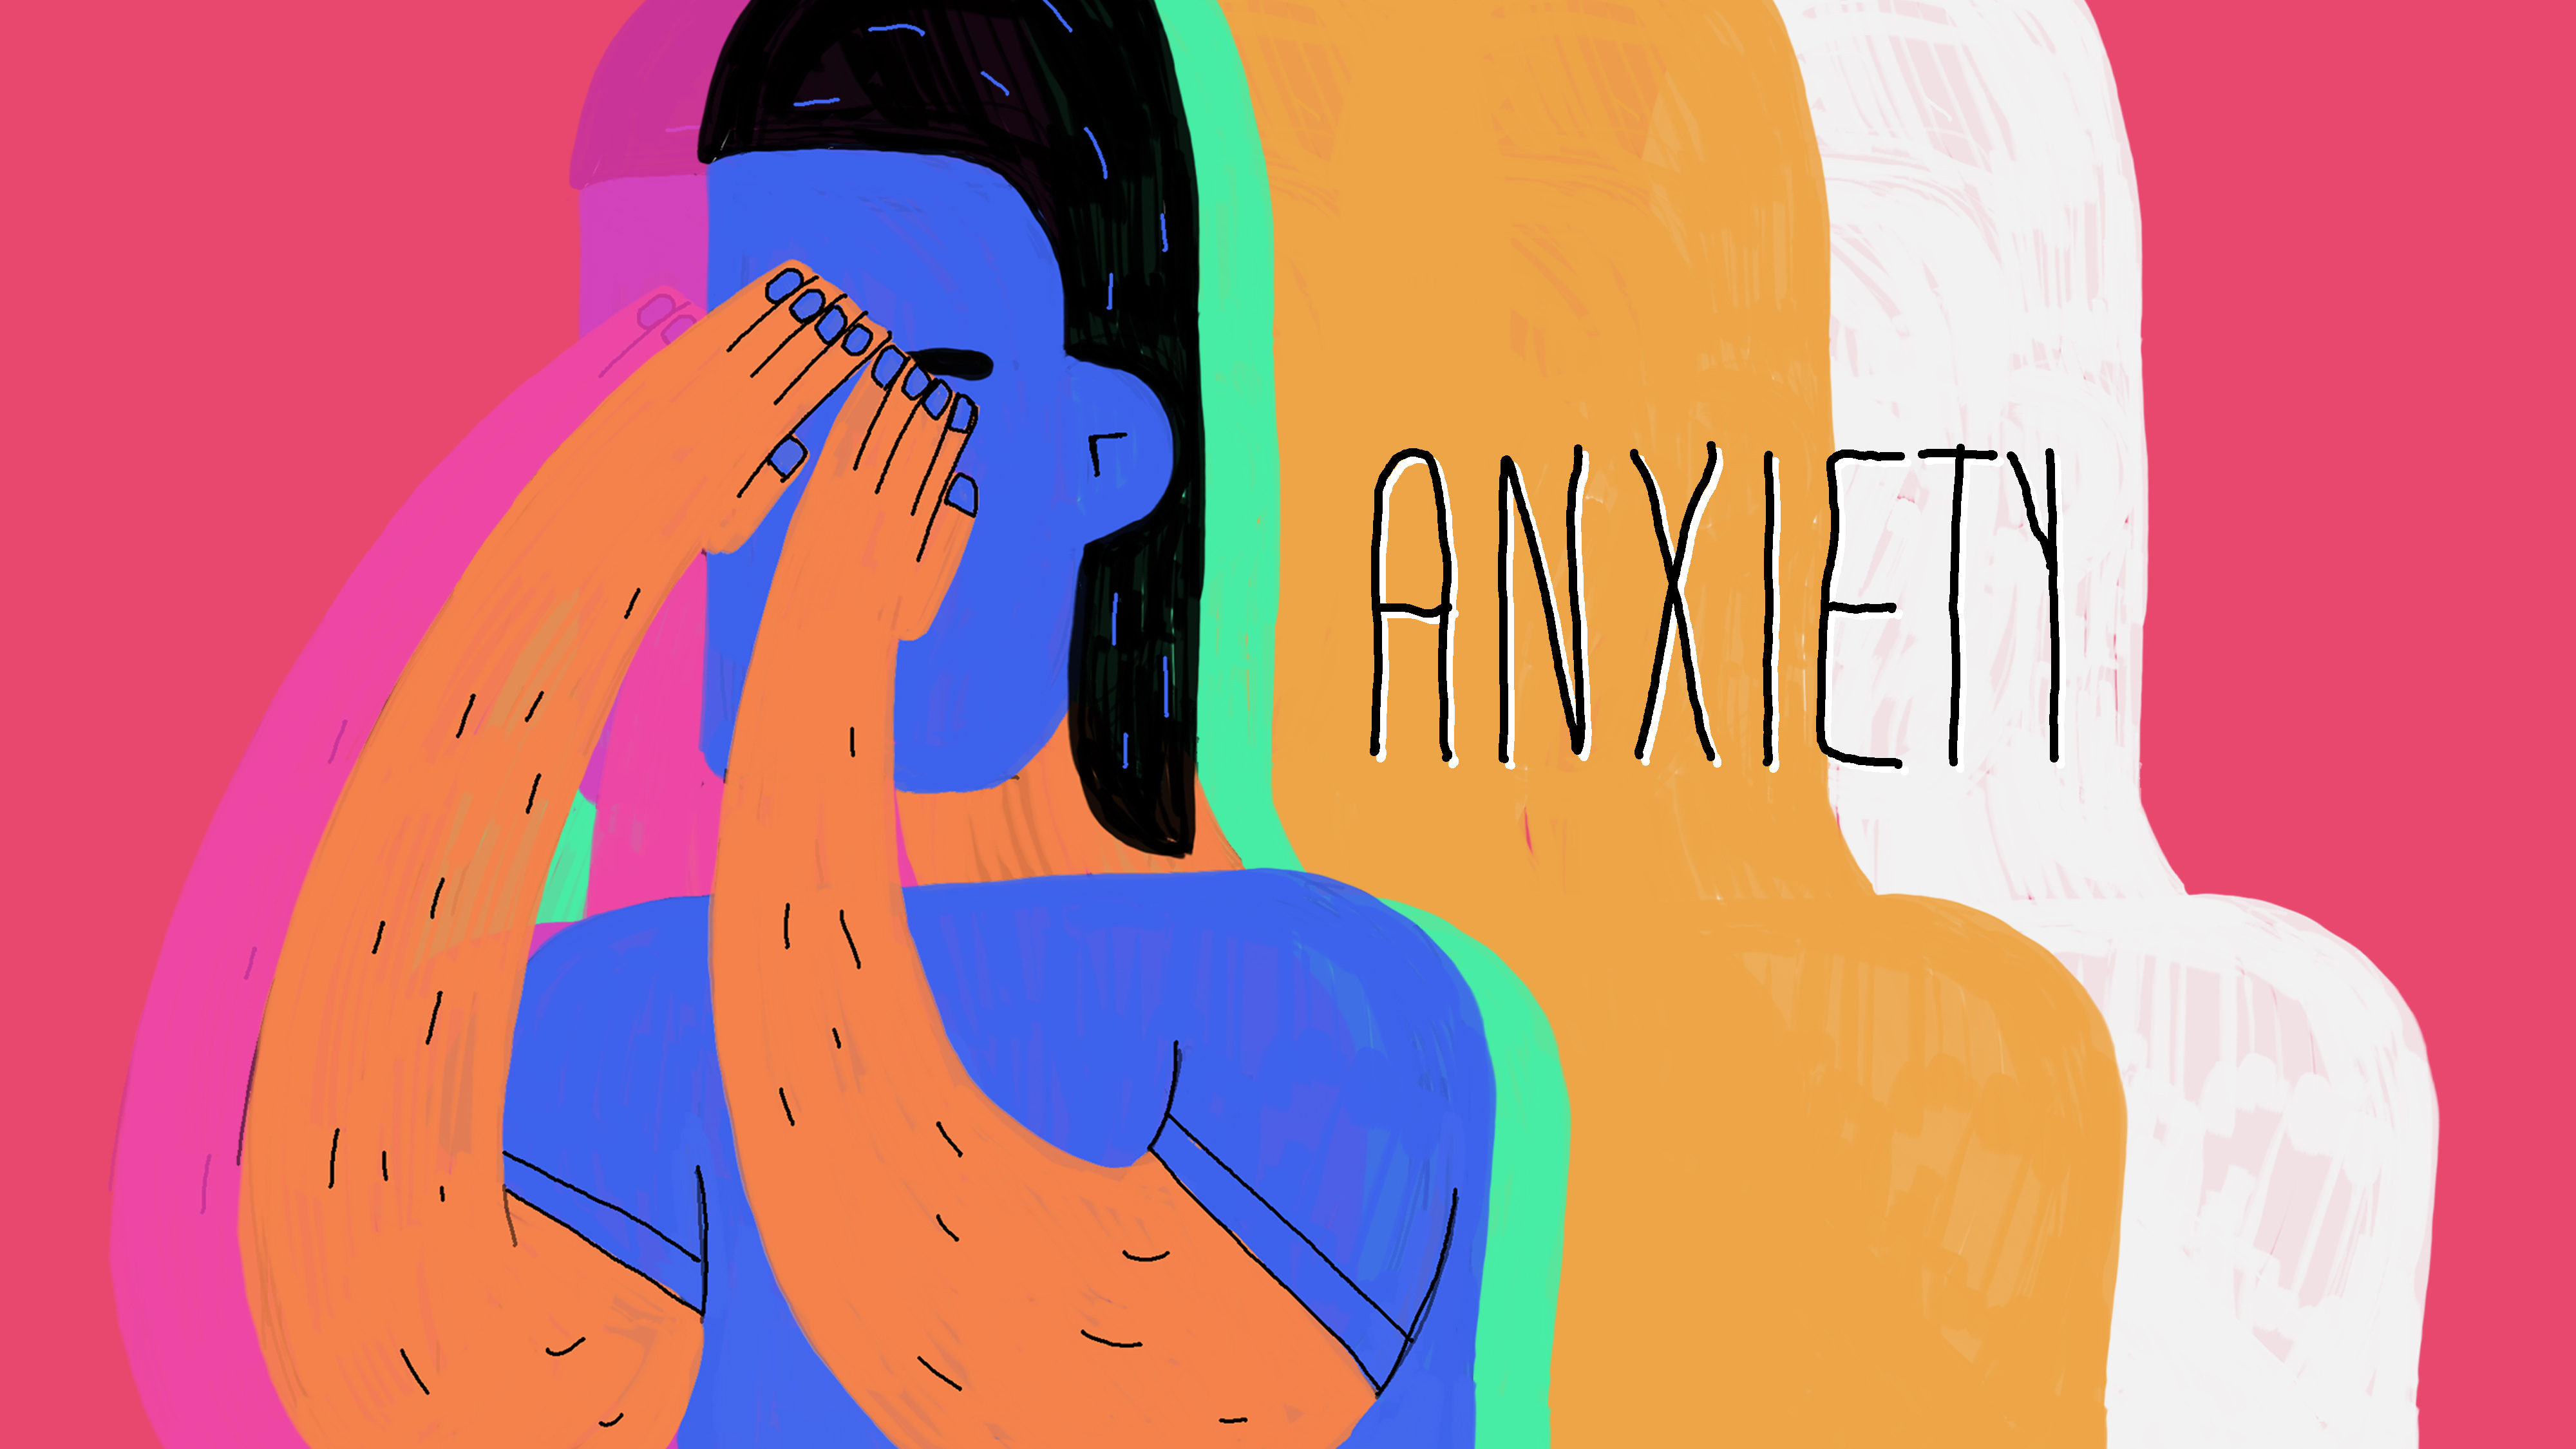 Managing anxiety during Covid-19 is natural and stressful- You're not alone.